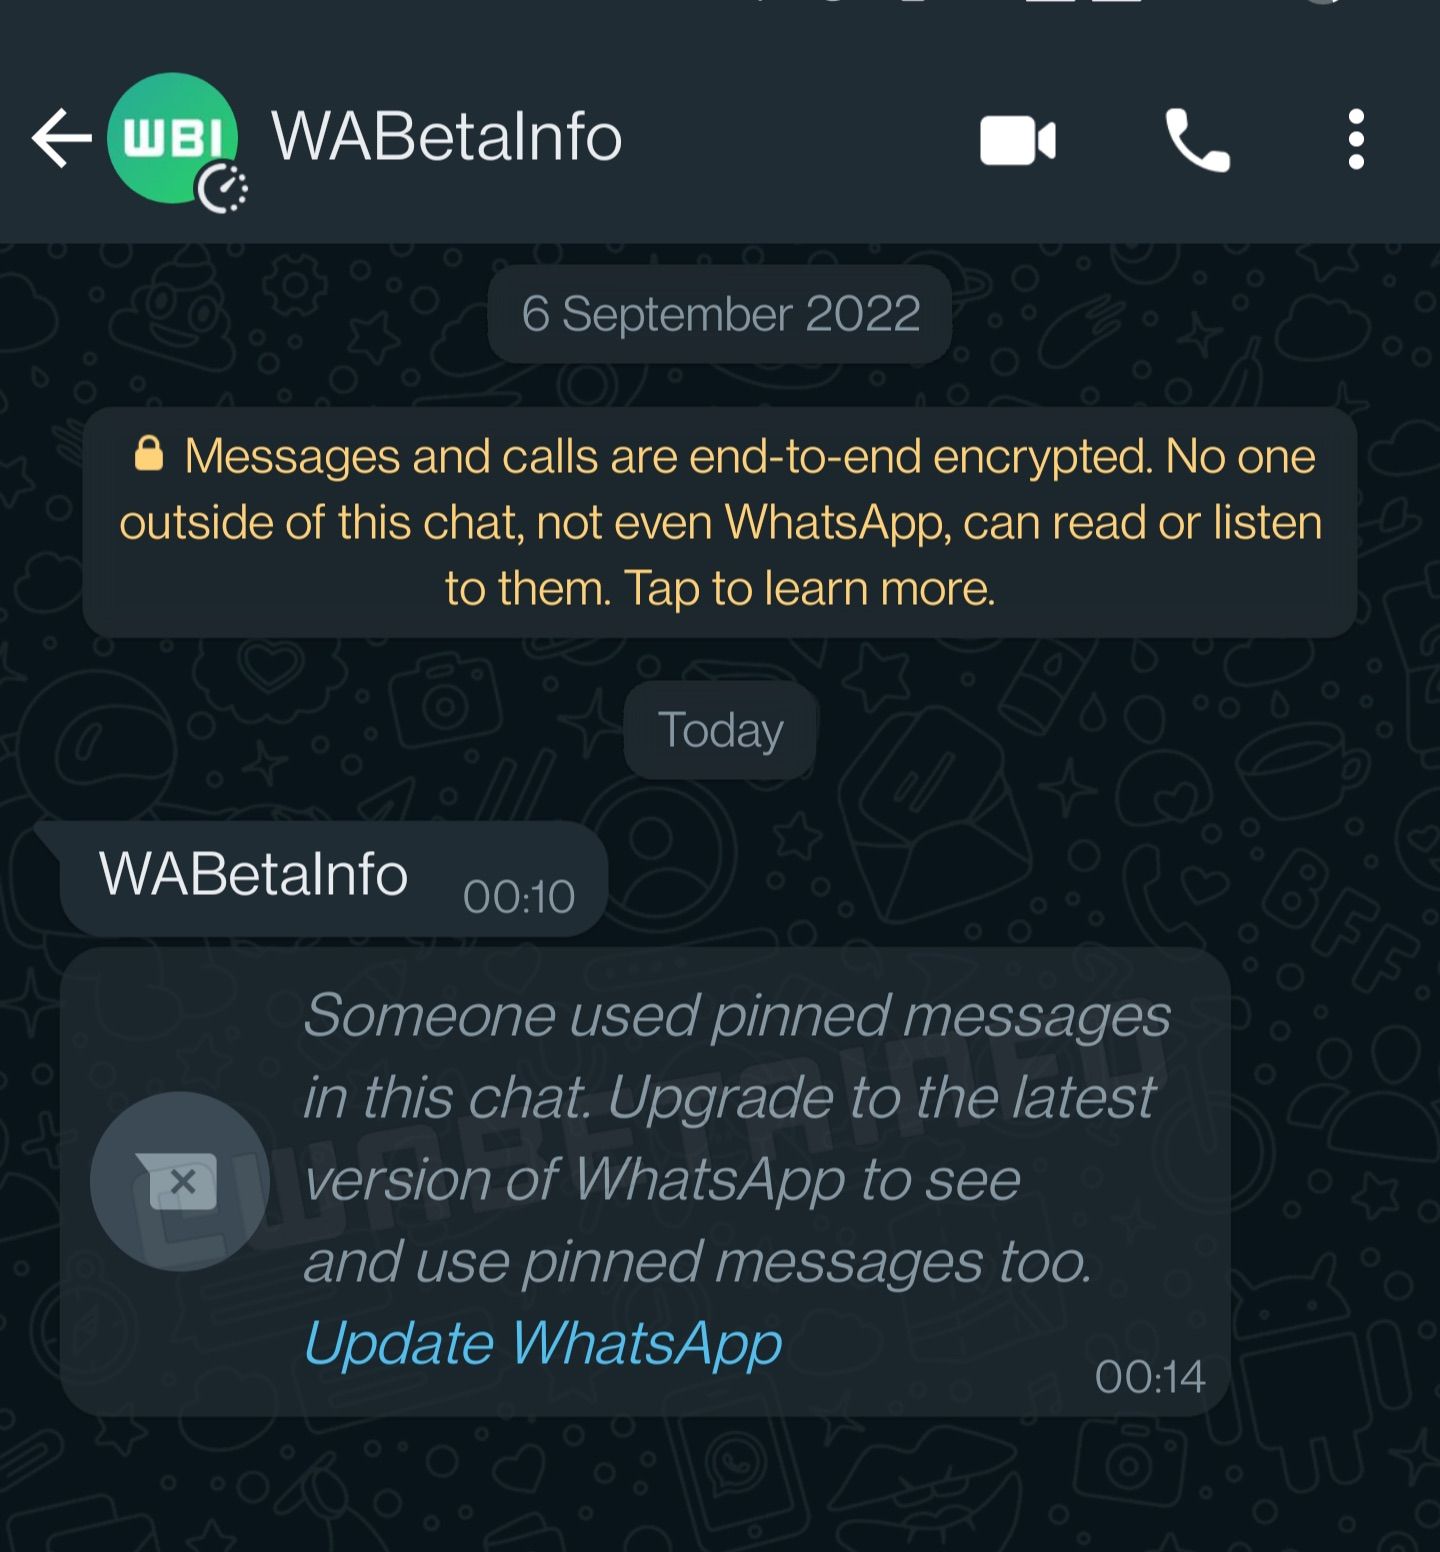 Update WhatsApp to view pinned messages prompt